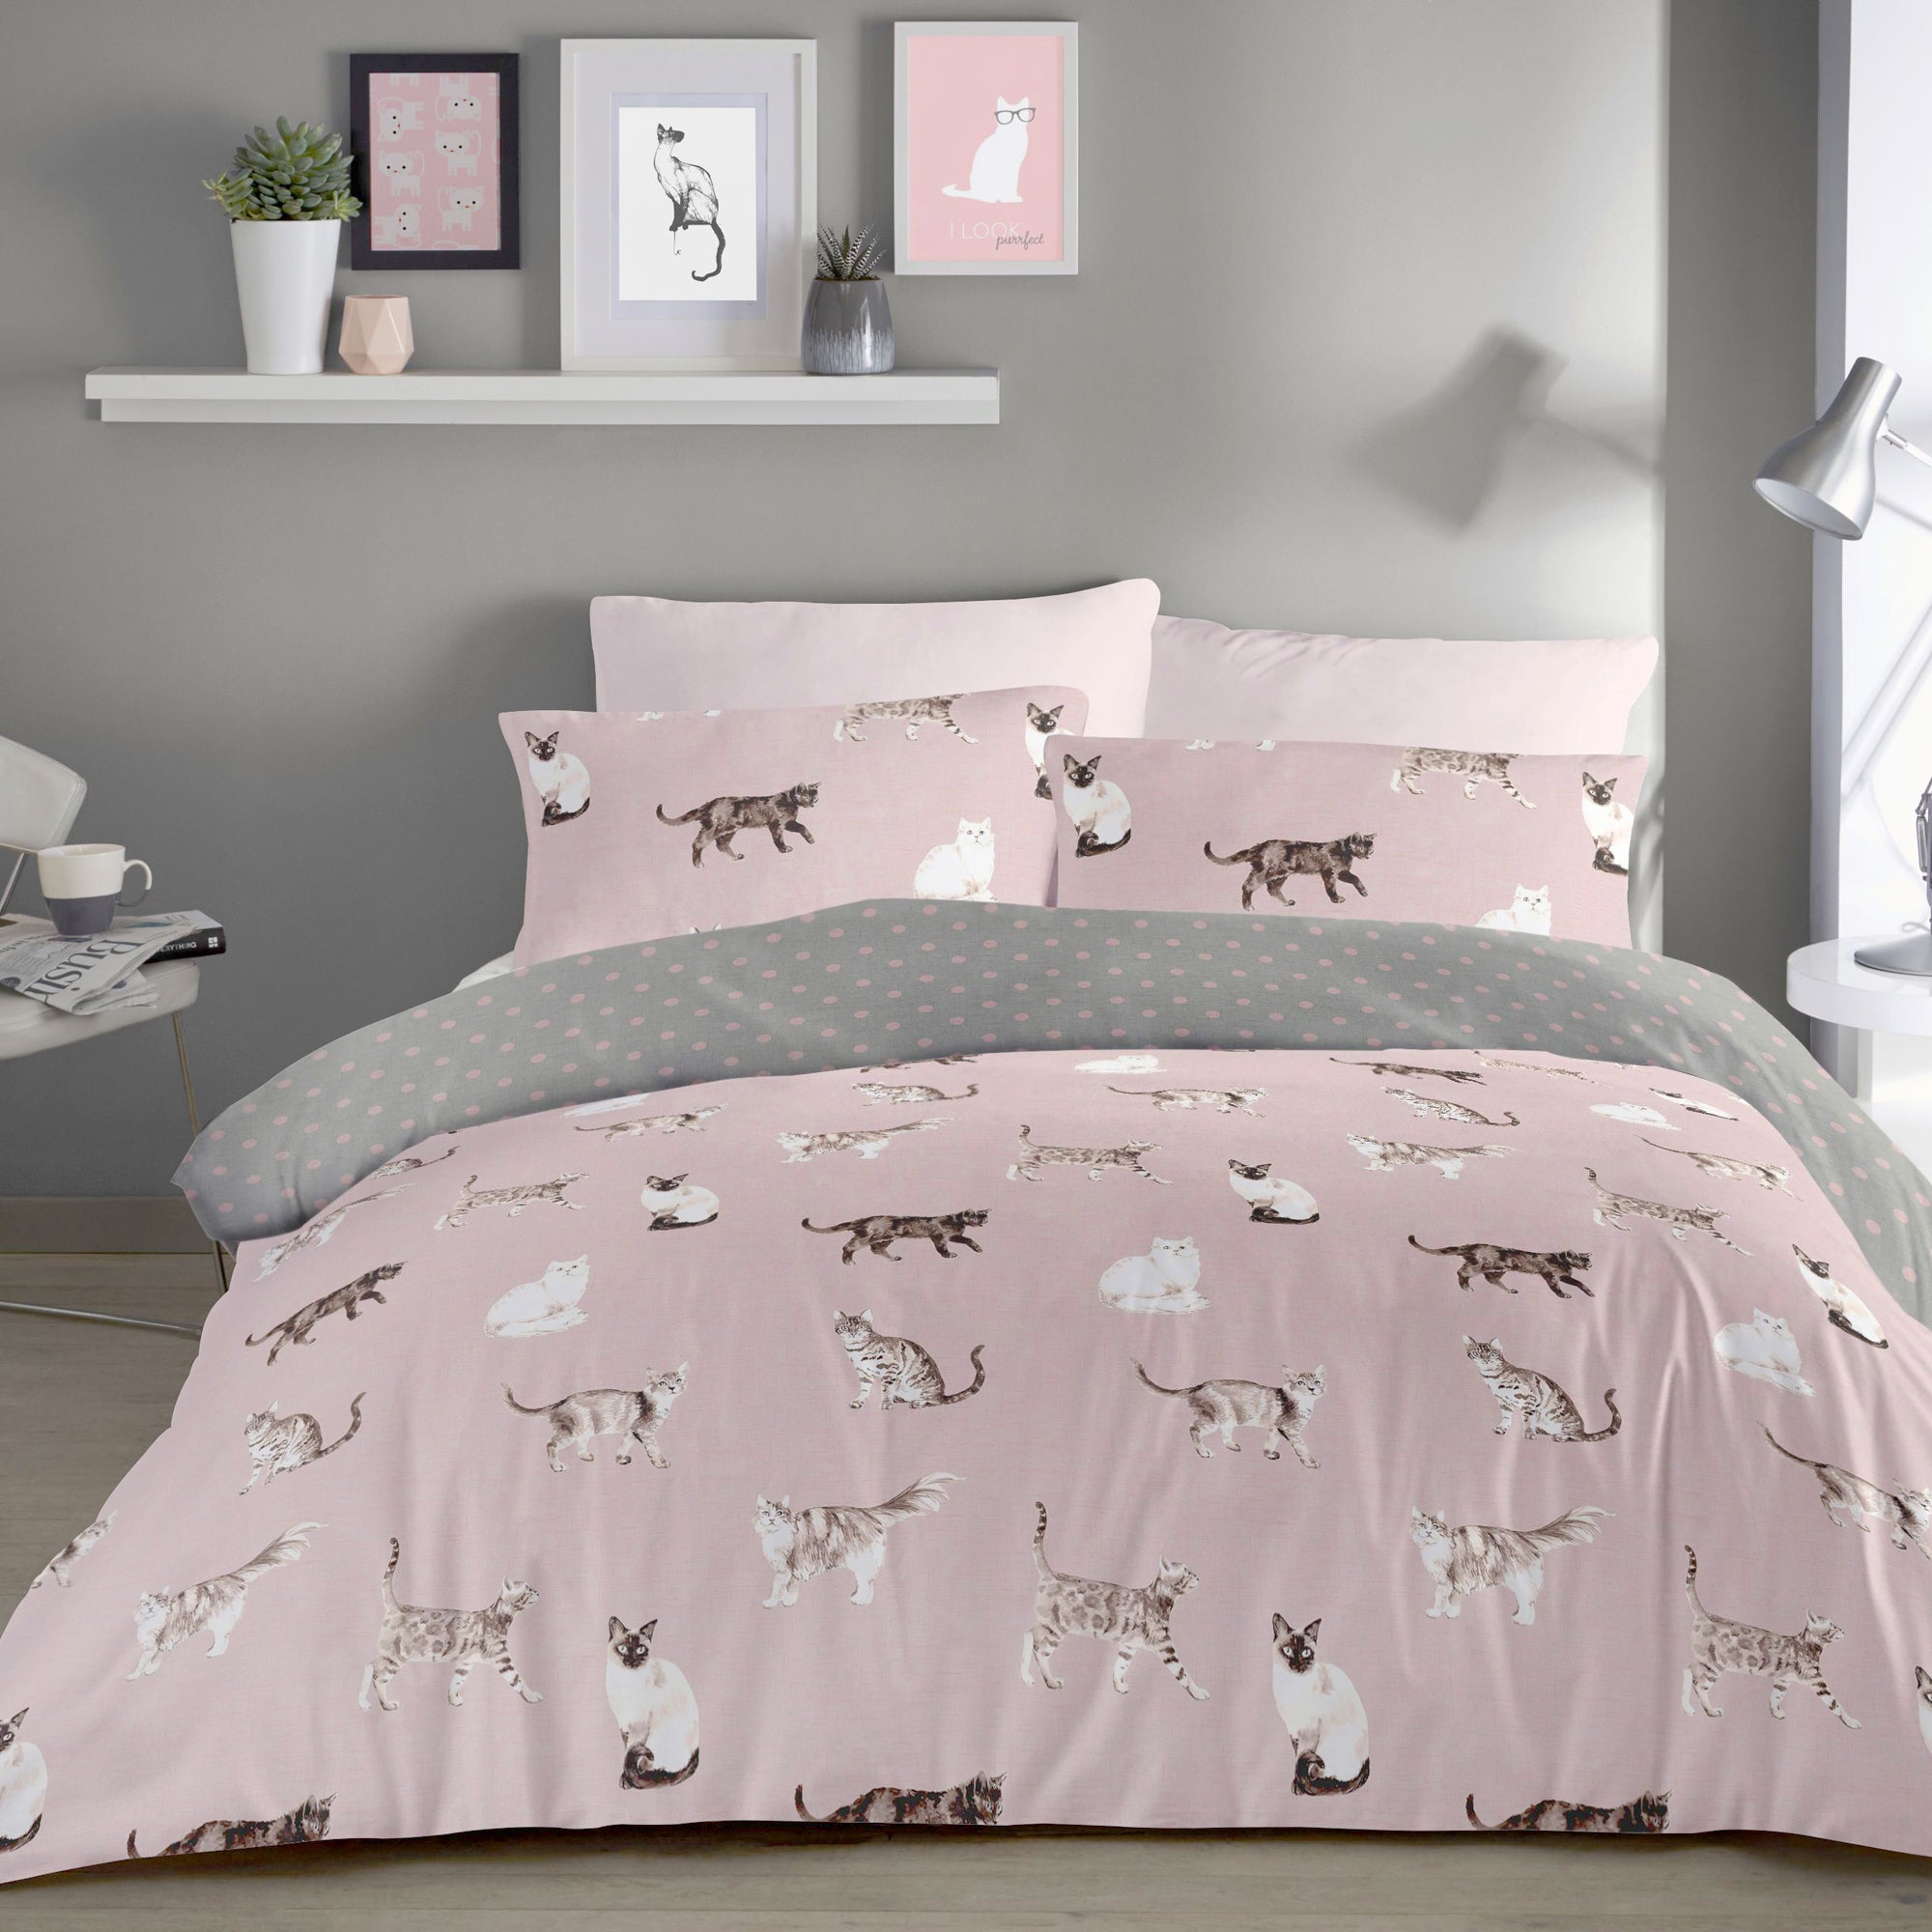 Cats	Blush - Easy Care Duvet Cover Set - By Fusion